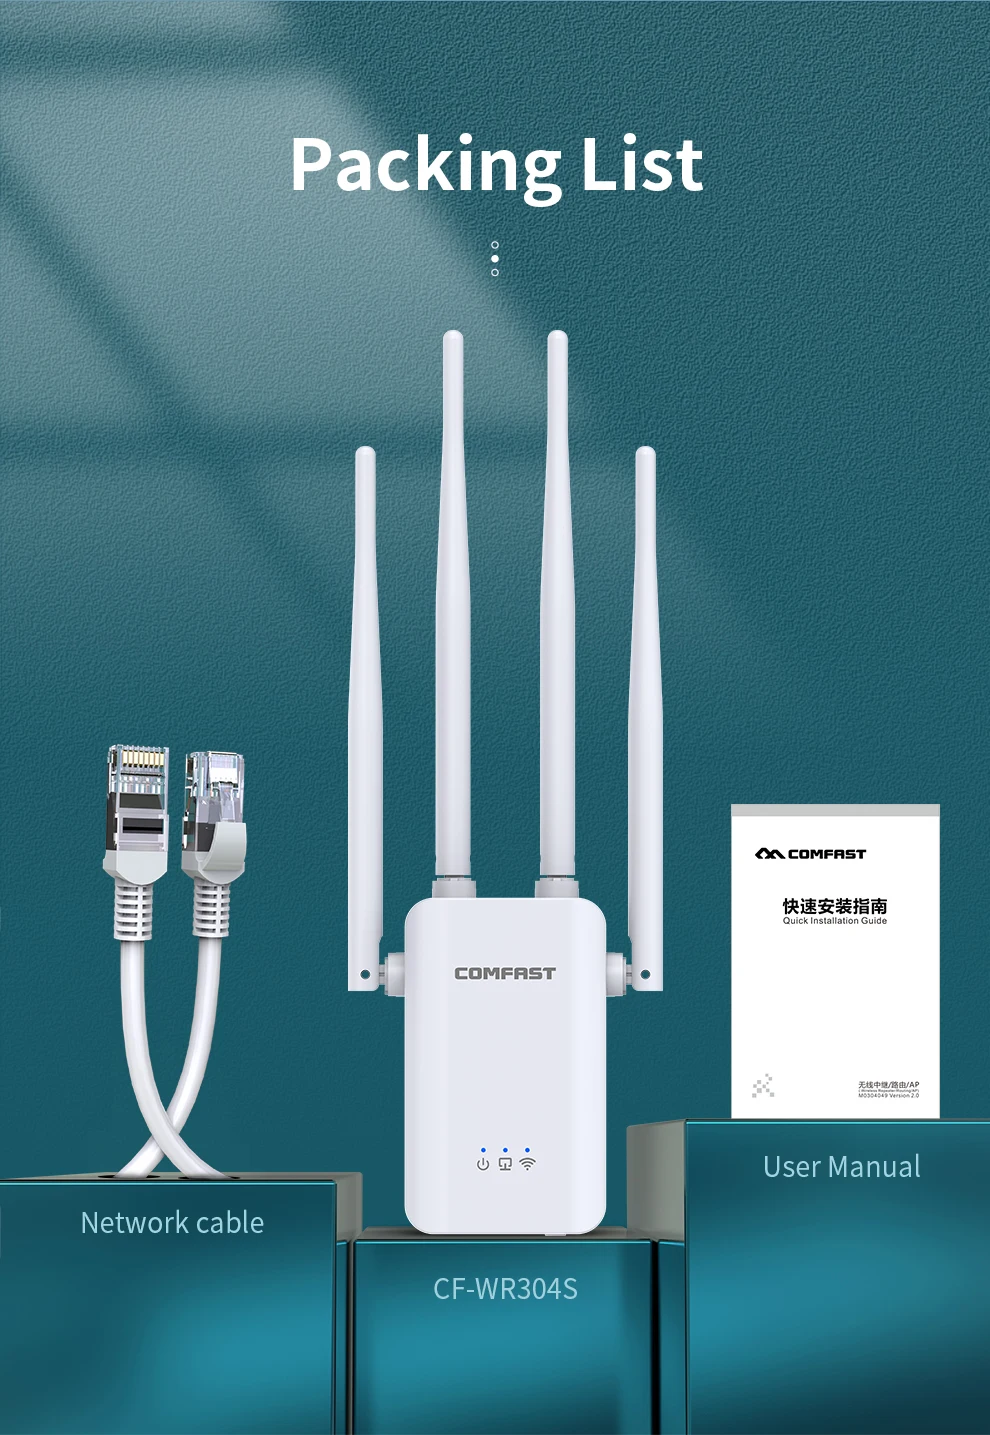 

COMFAST CF-WR304S 2.4GHz 300Mbps Wireless WiFi Repeater Signal Extender Wi fi Amplifier Access Point Router 4* 3dBi WIFI Antenna